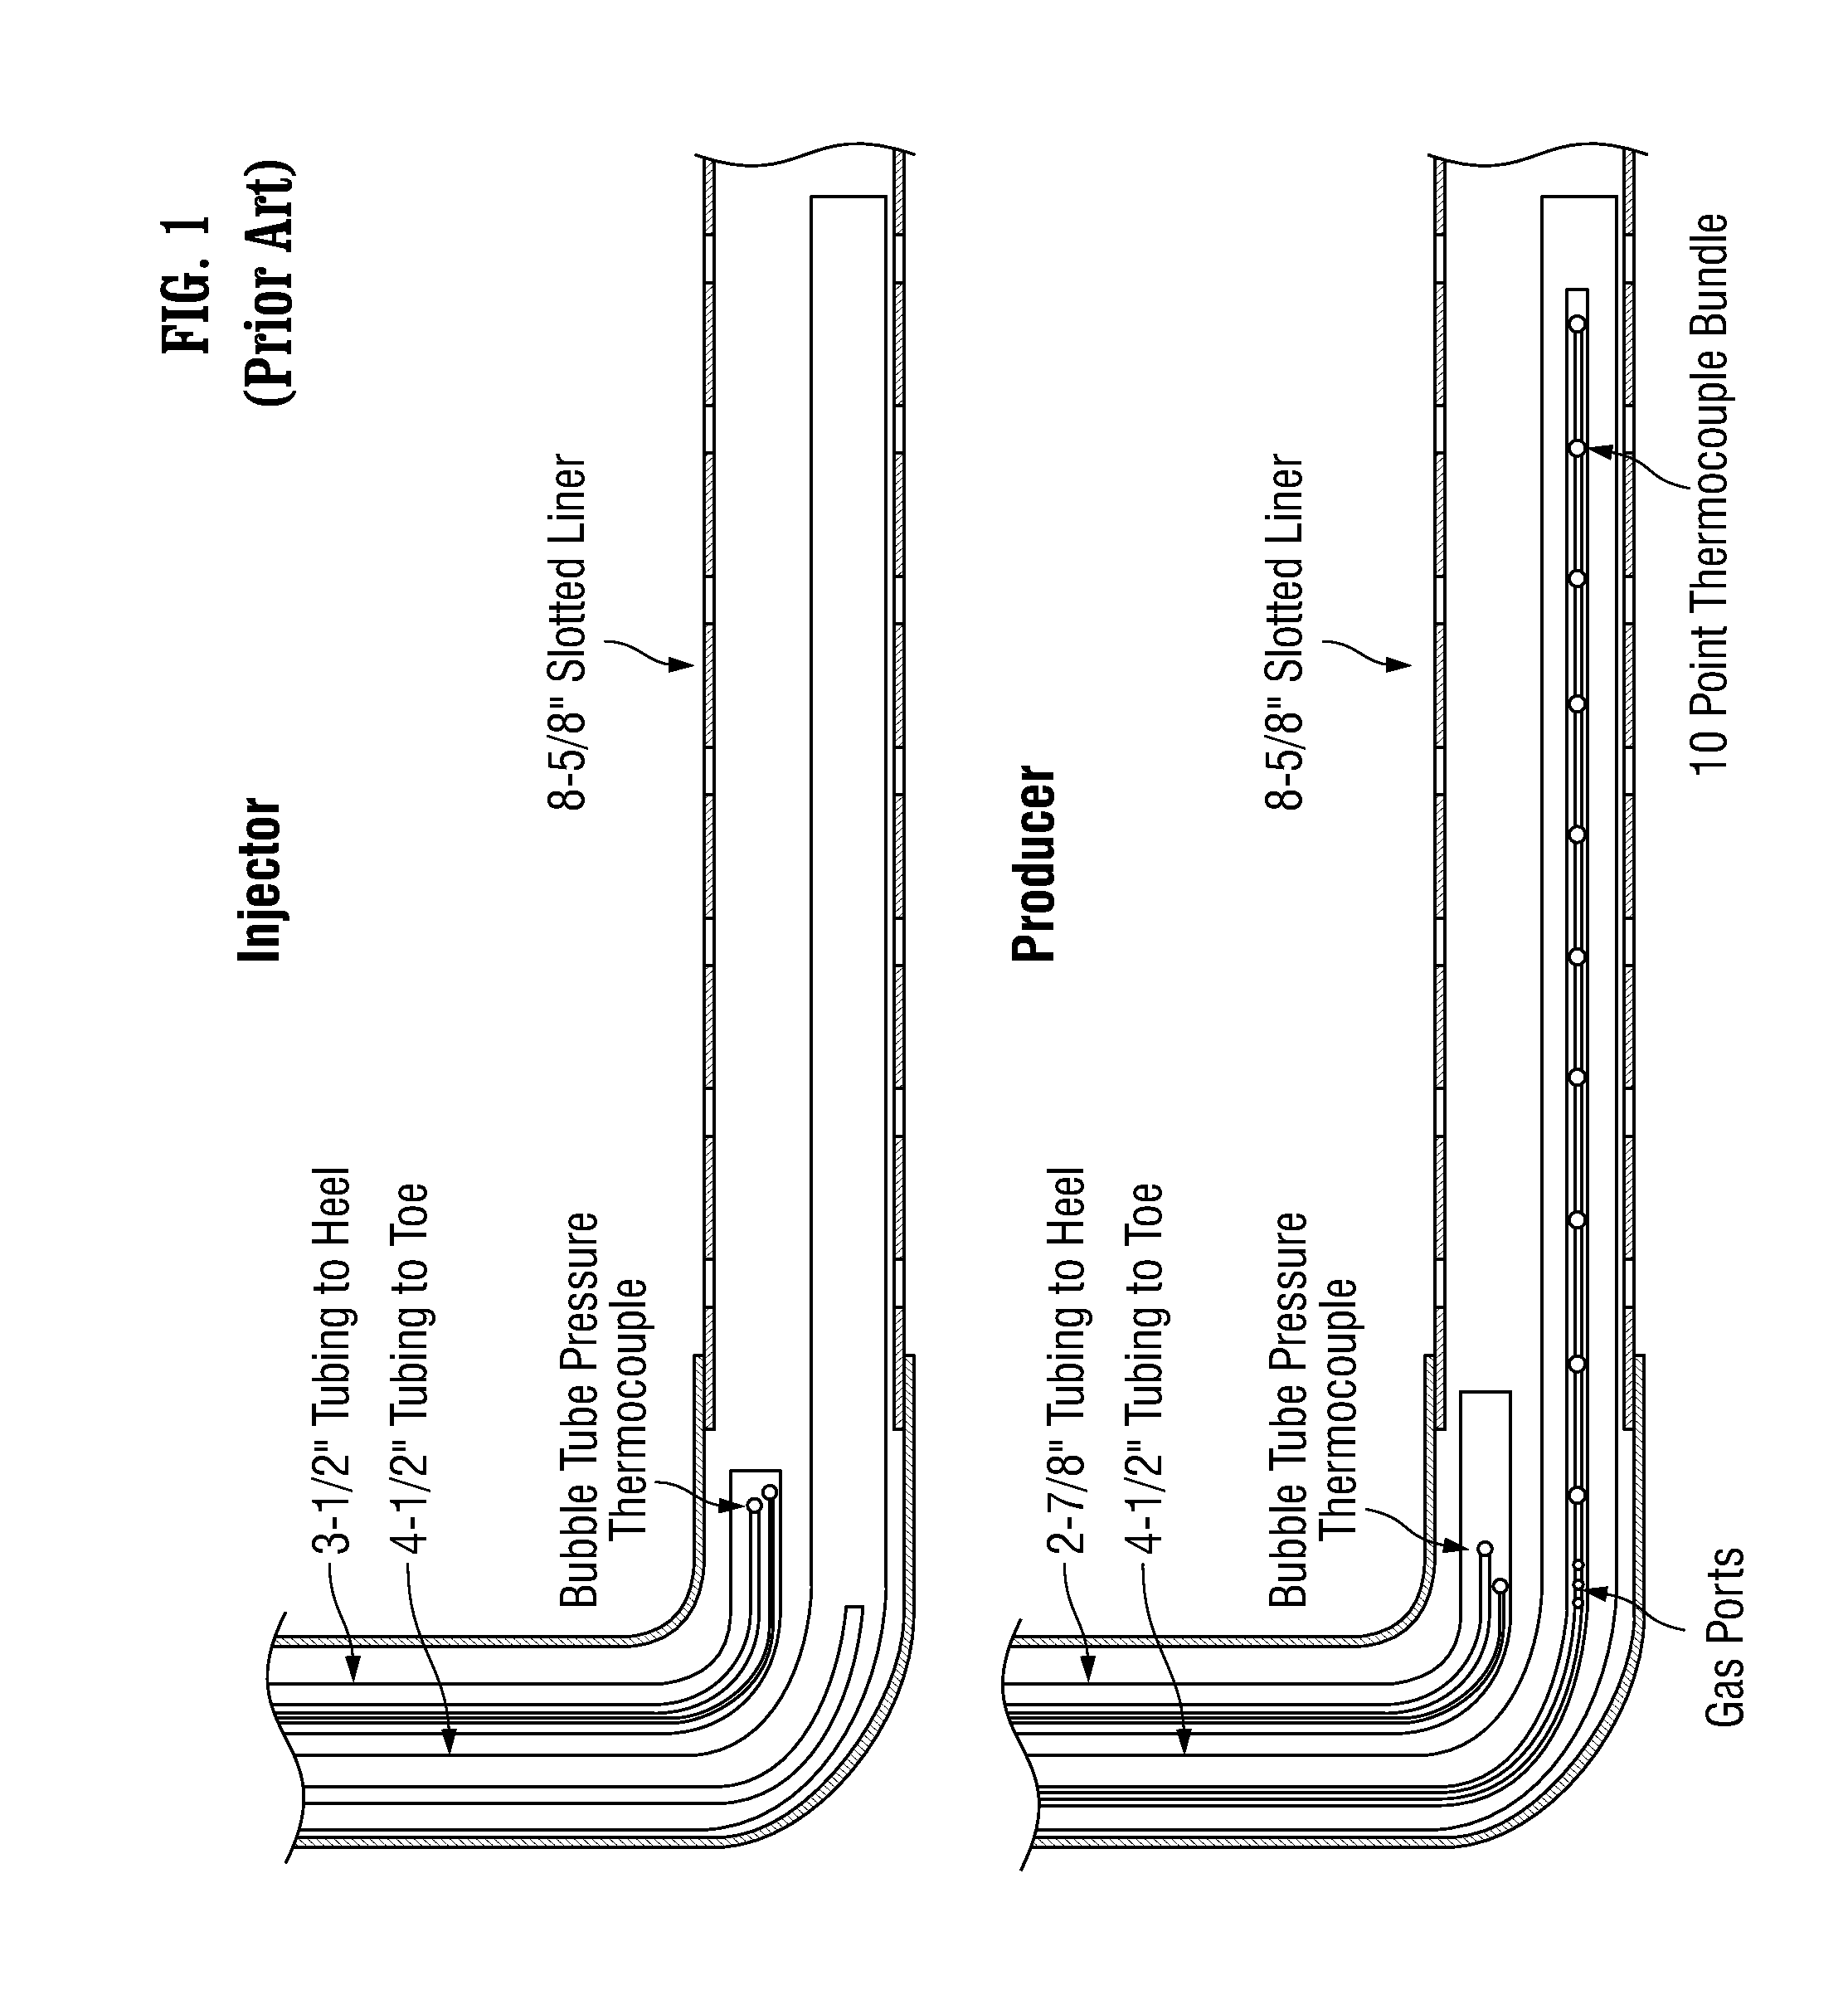 Hydrocarbon recovery employing an injection well and a production well having multiple tubing strings with active feedback control